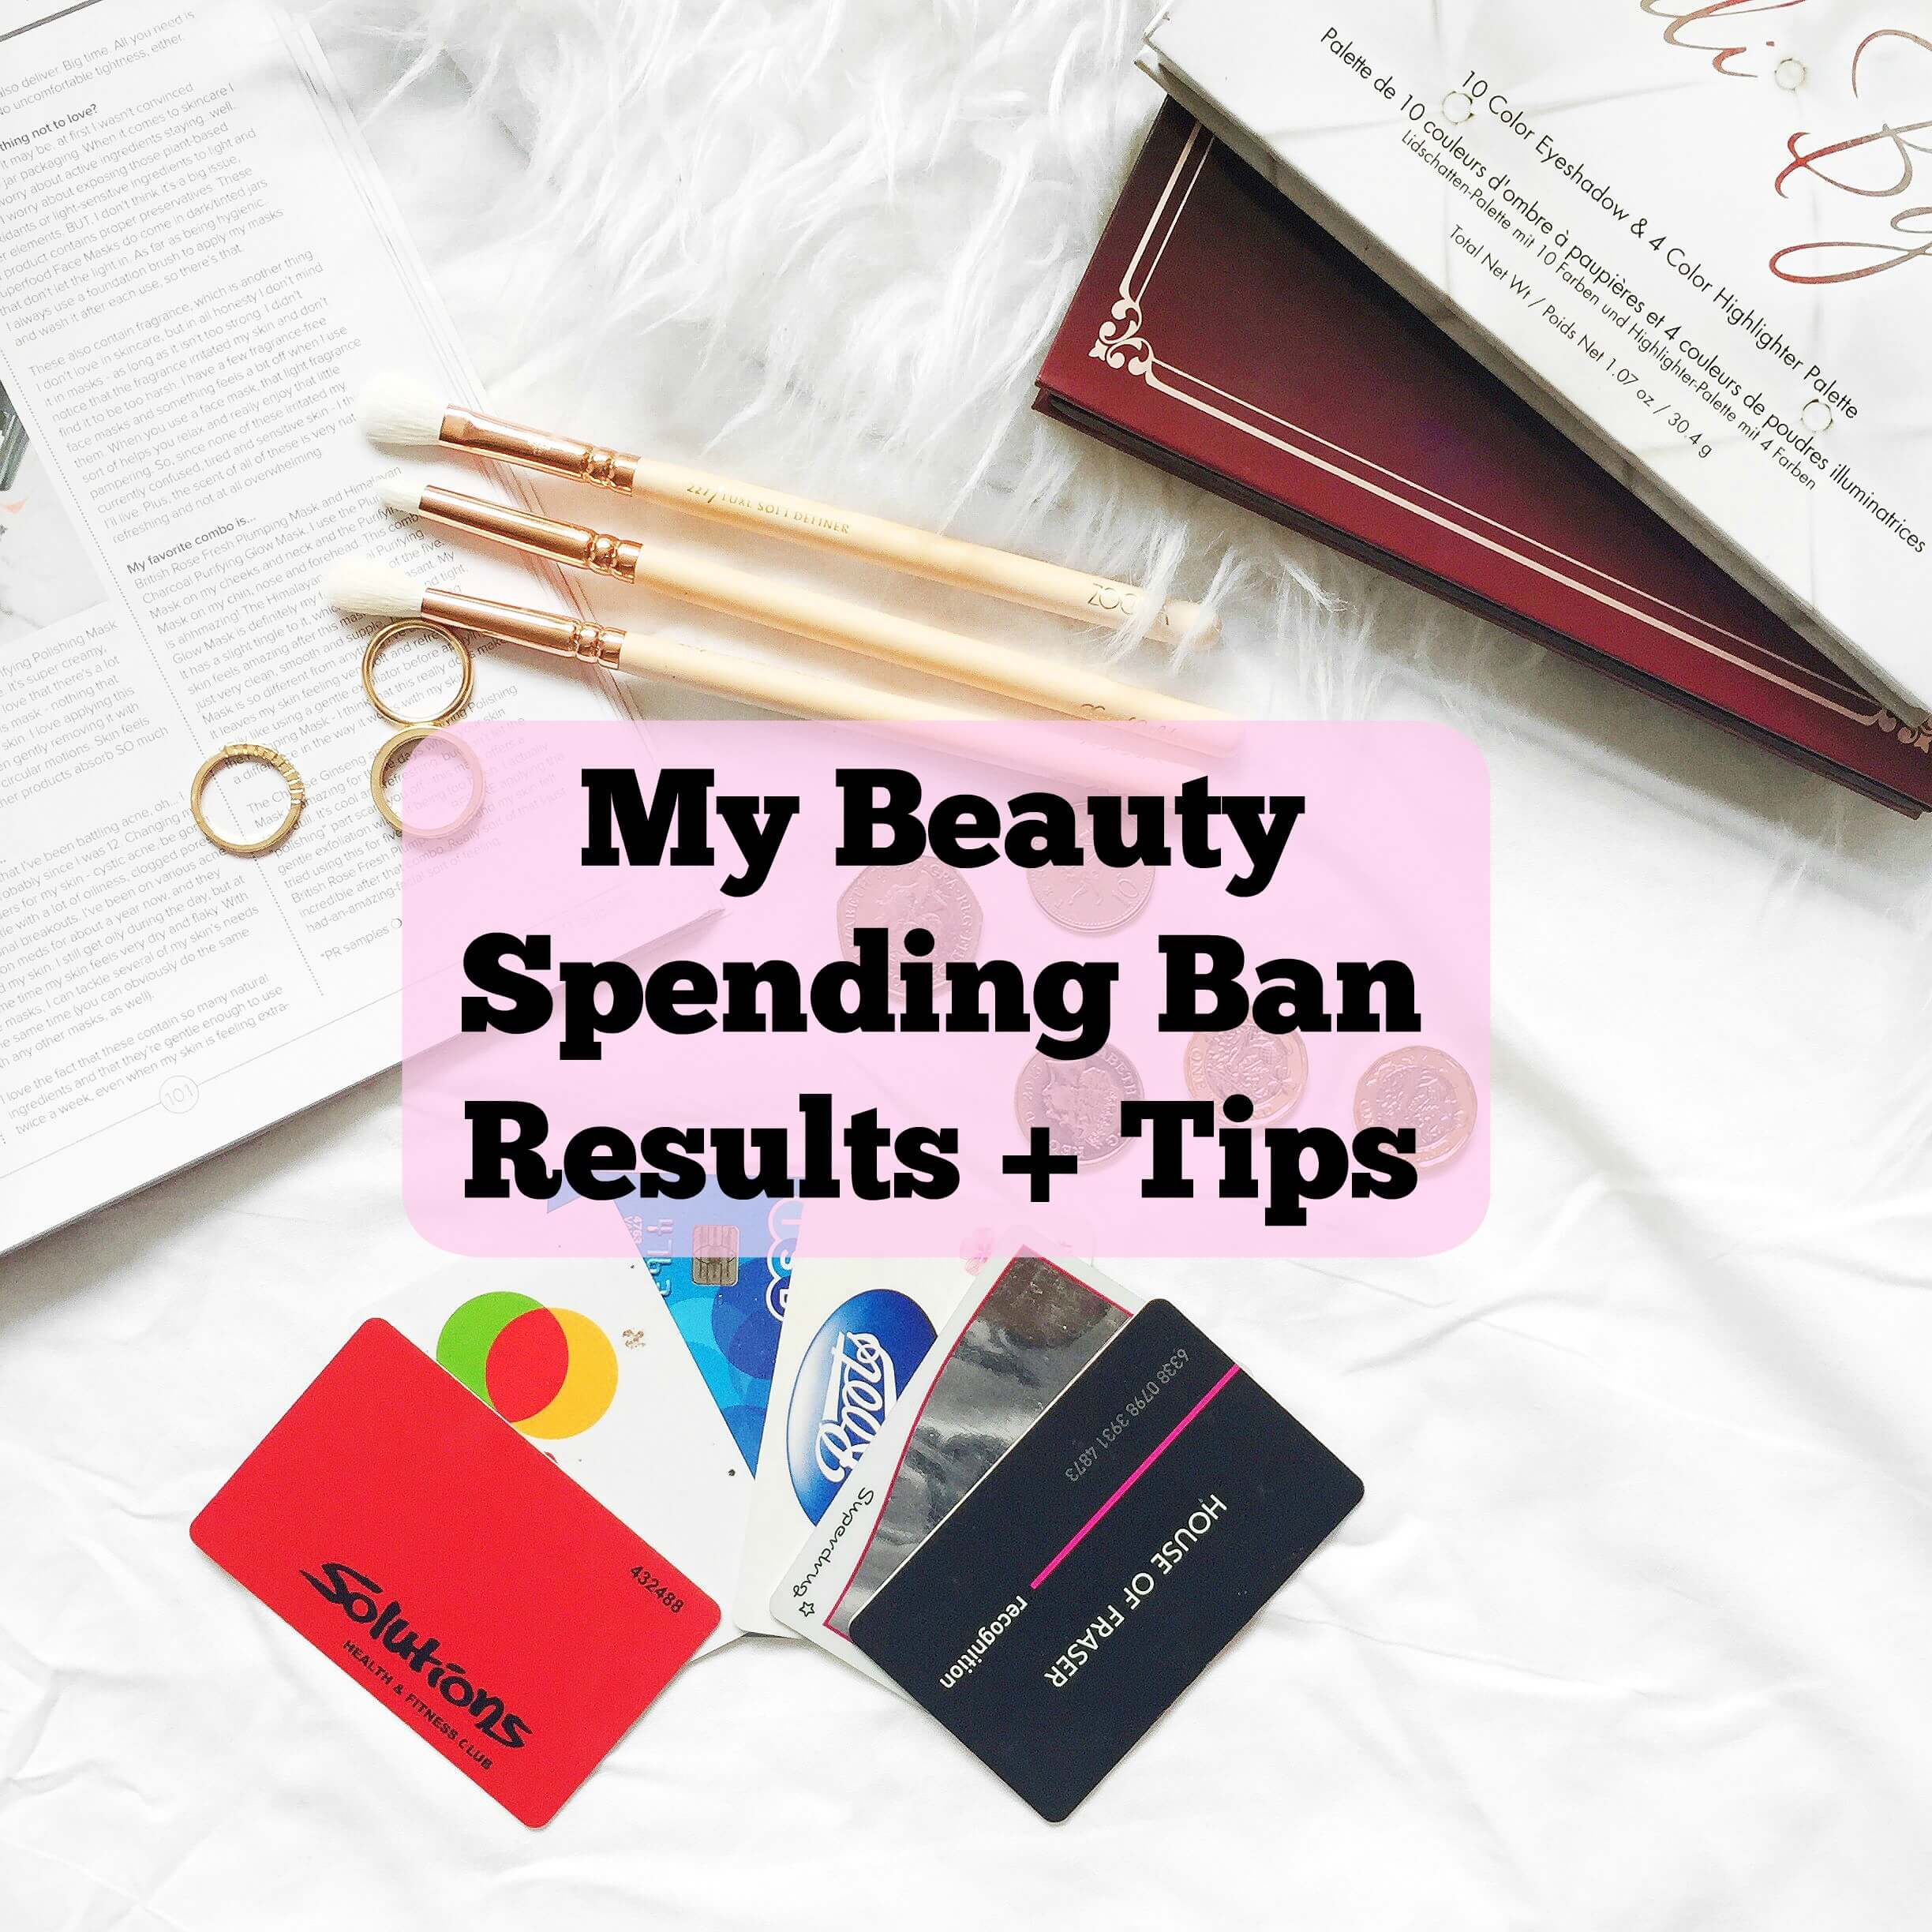 beauty spending ban results and tips